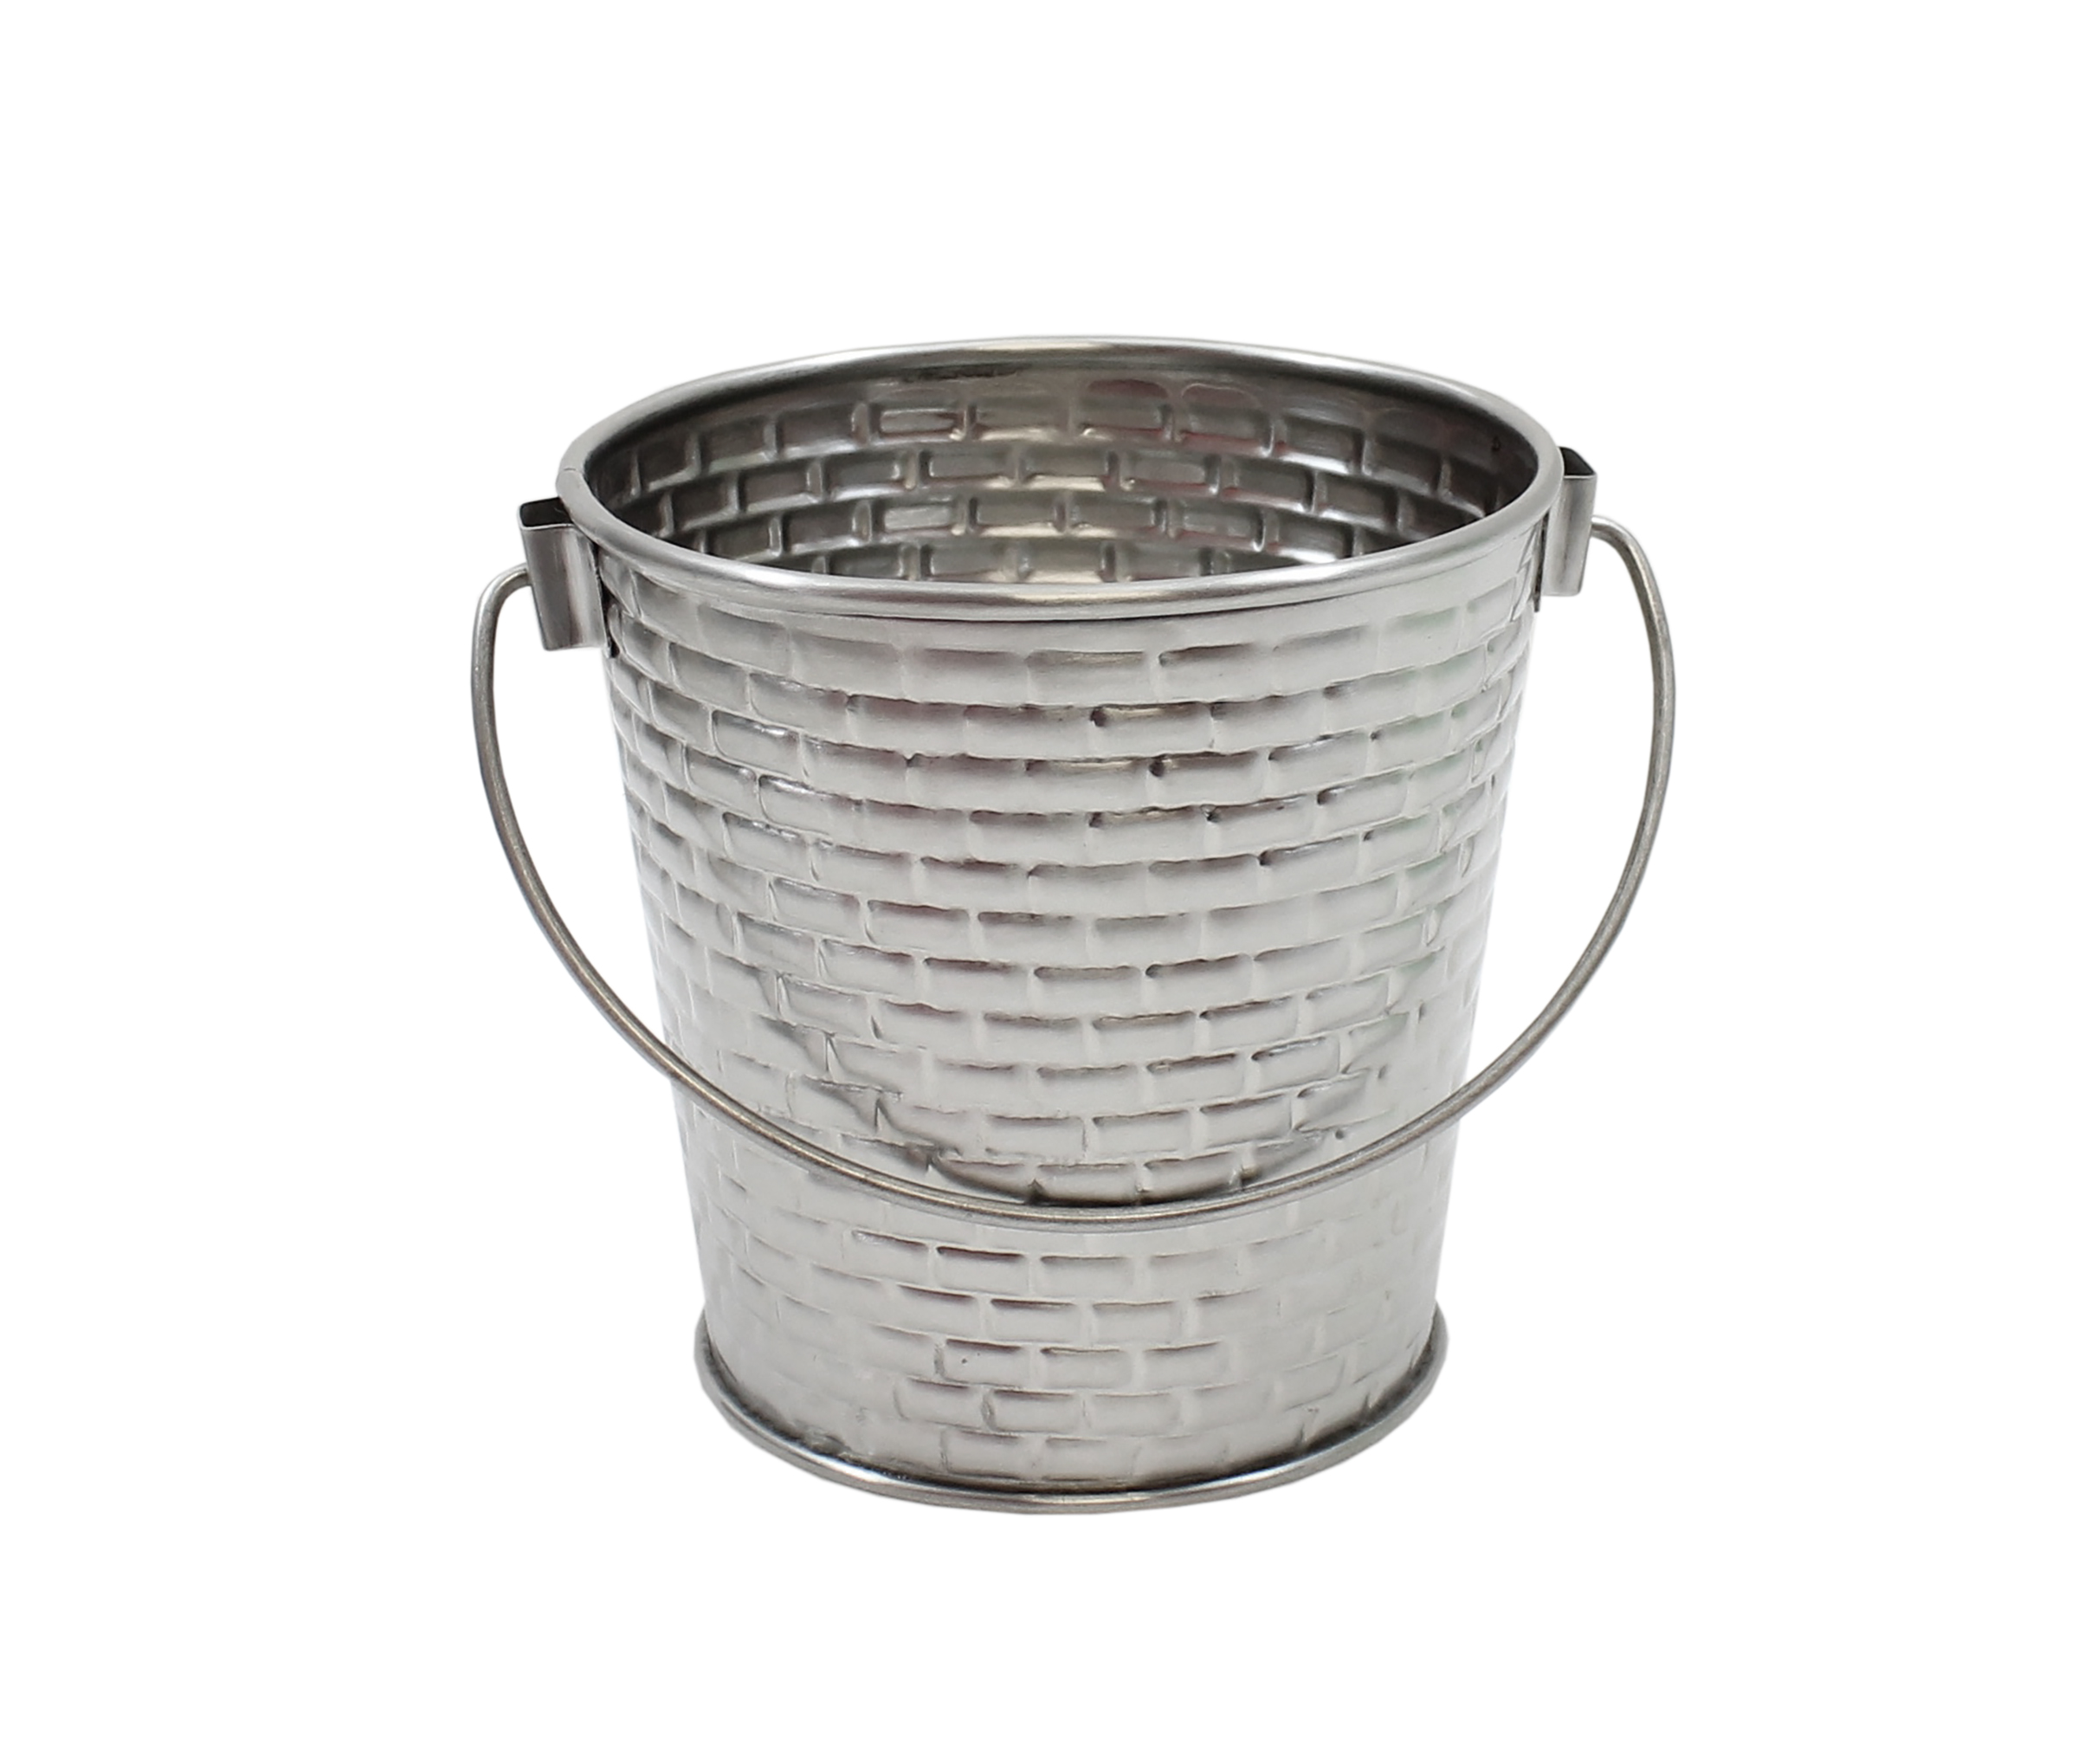 GTSS44 Brickhouse Collection™ Round Pail with Handle TABLECRAFT